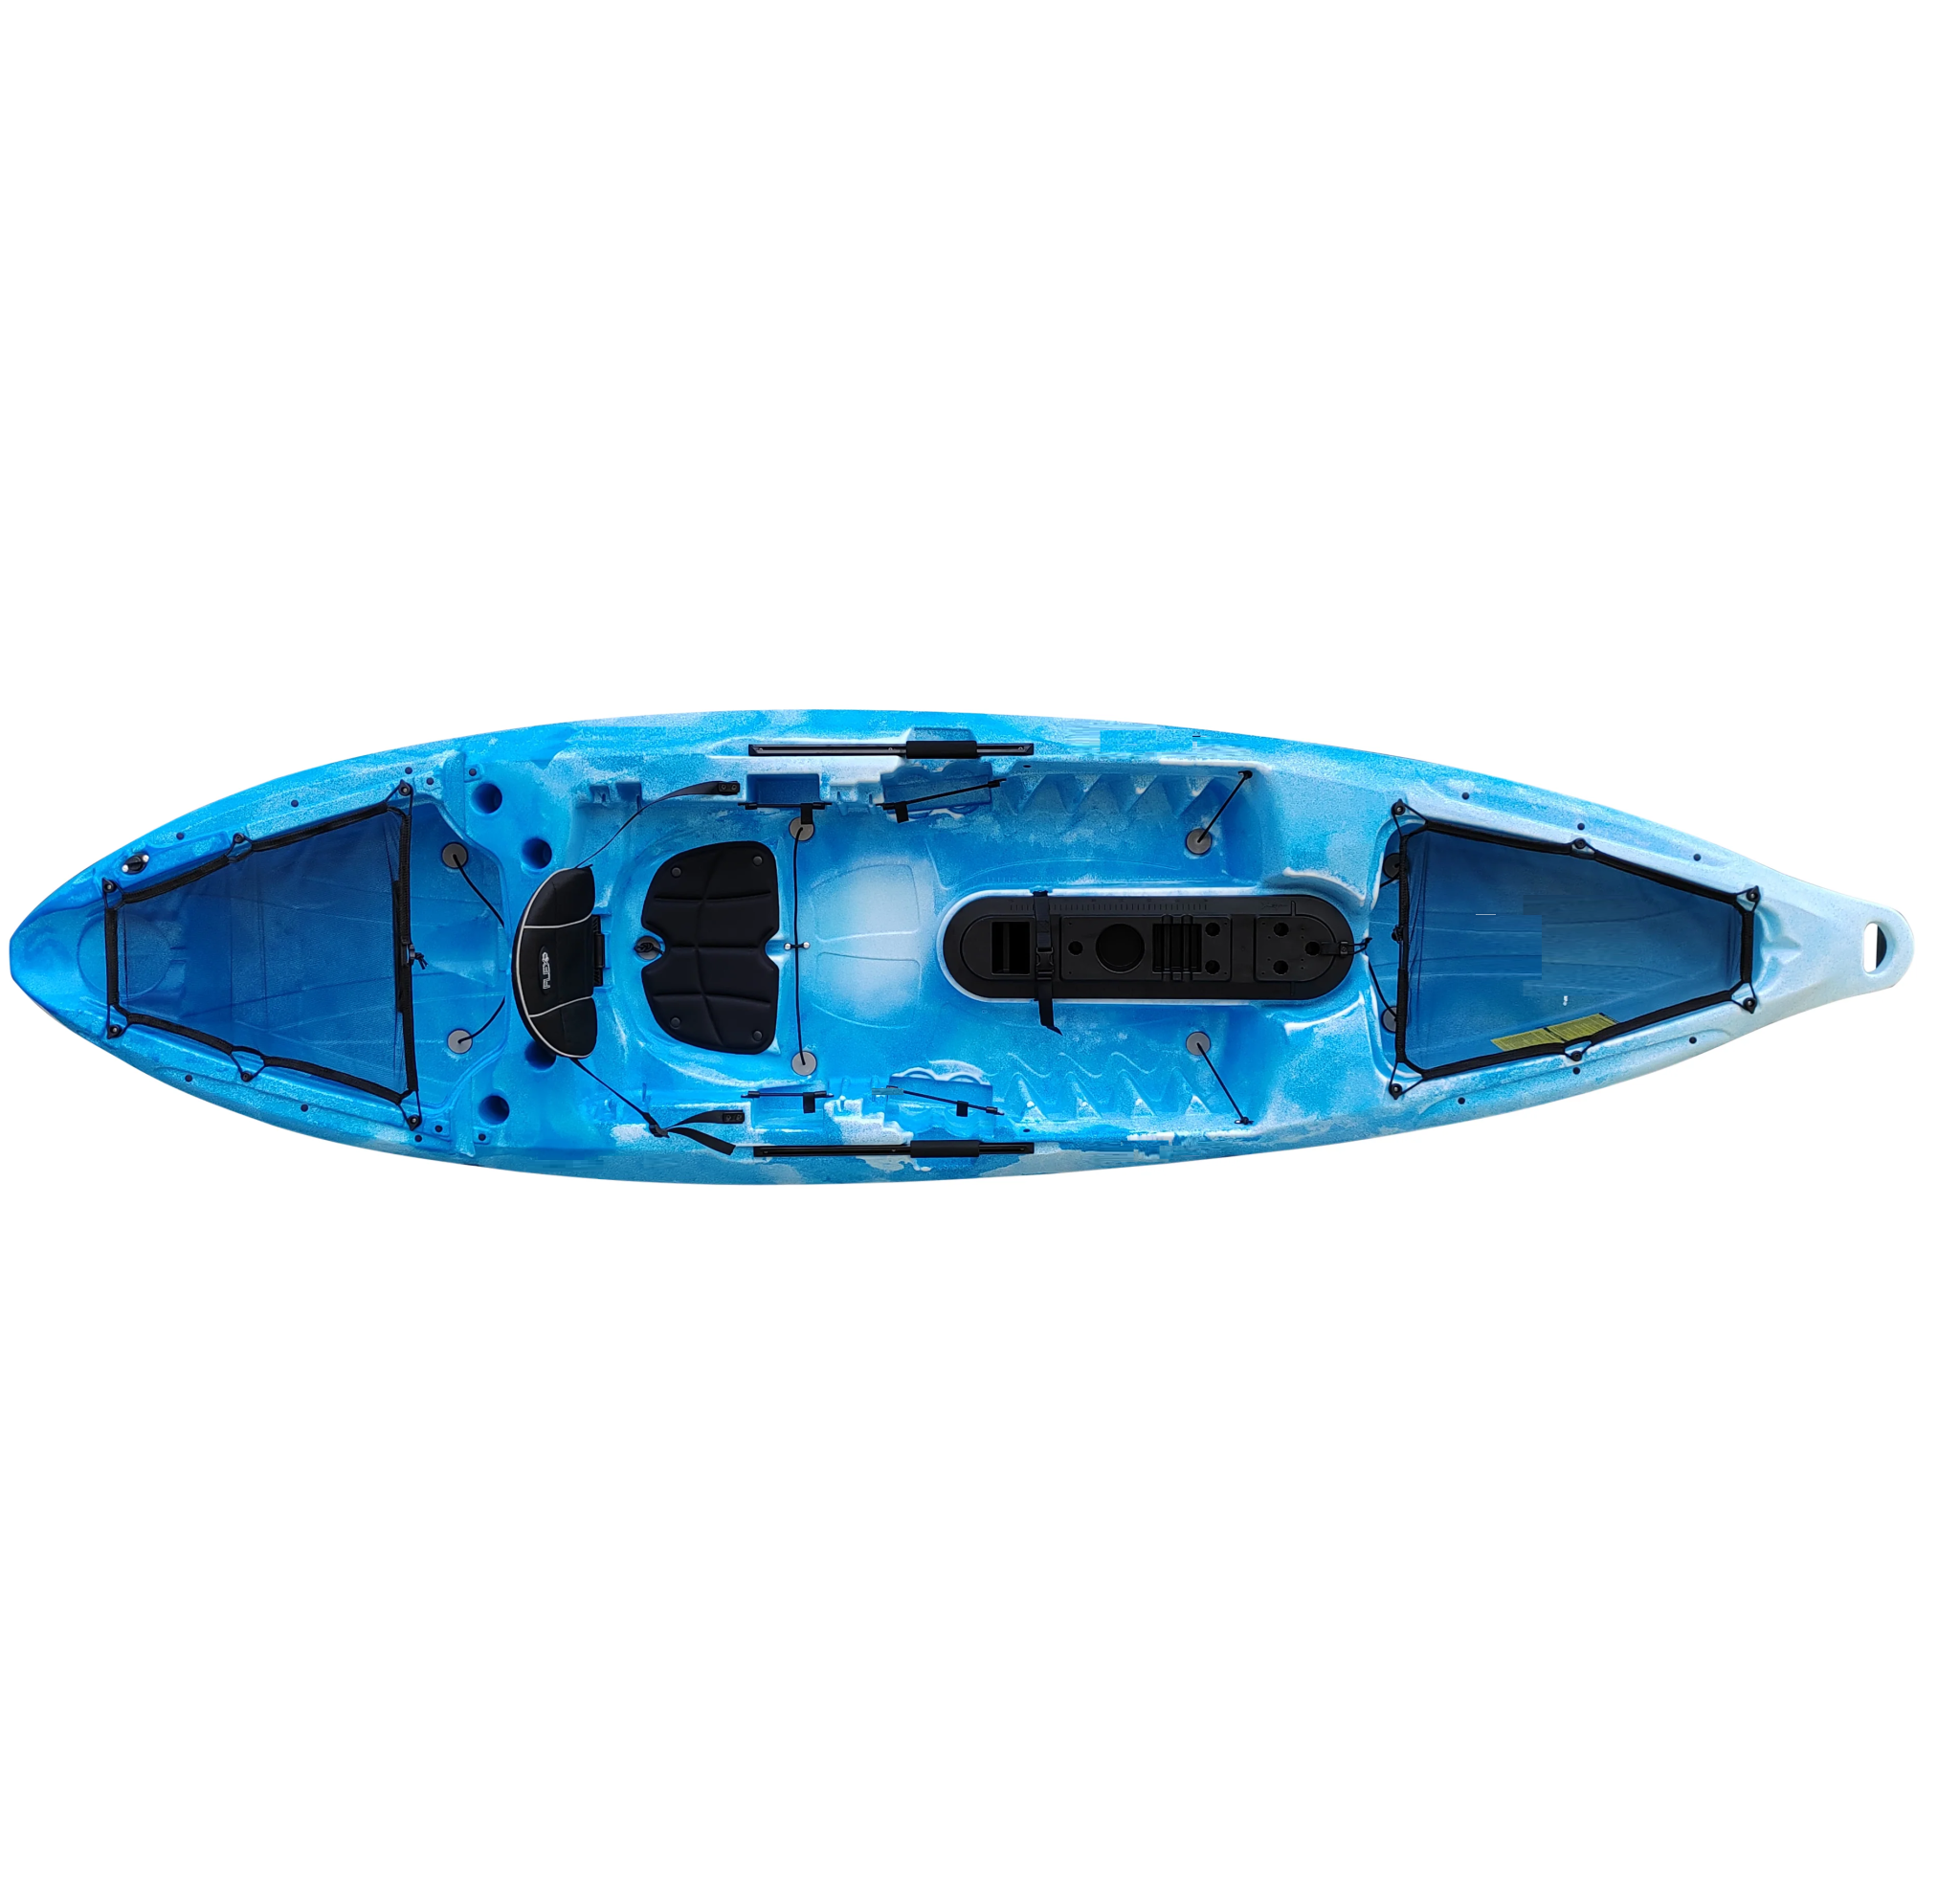 Fleet 10 standard Sit on top Kayak. Top View Blue White- has optional extra padded back band